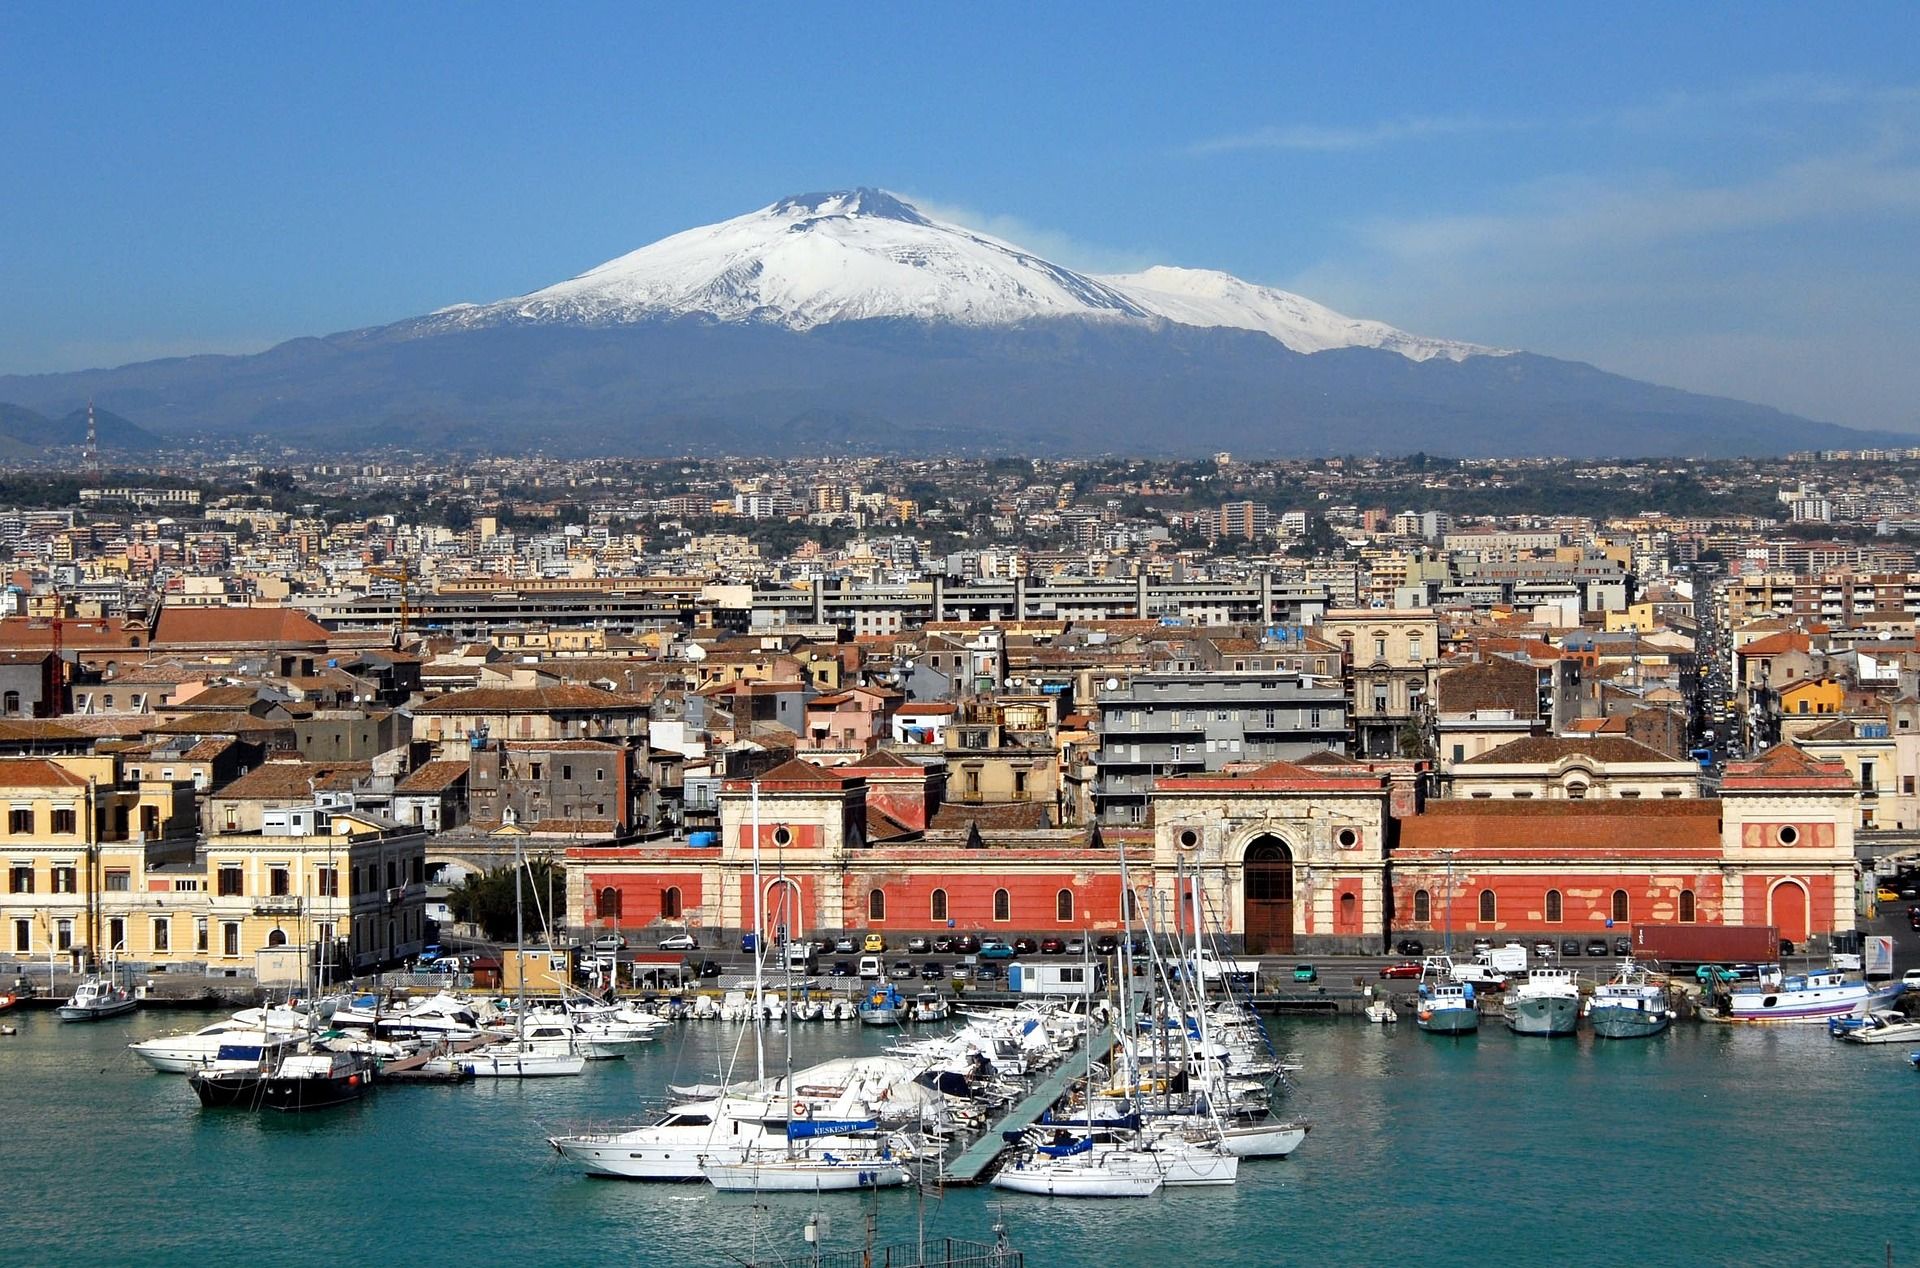 A view of Catania in Italy with Mount Etna in the background